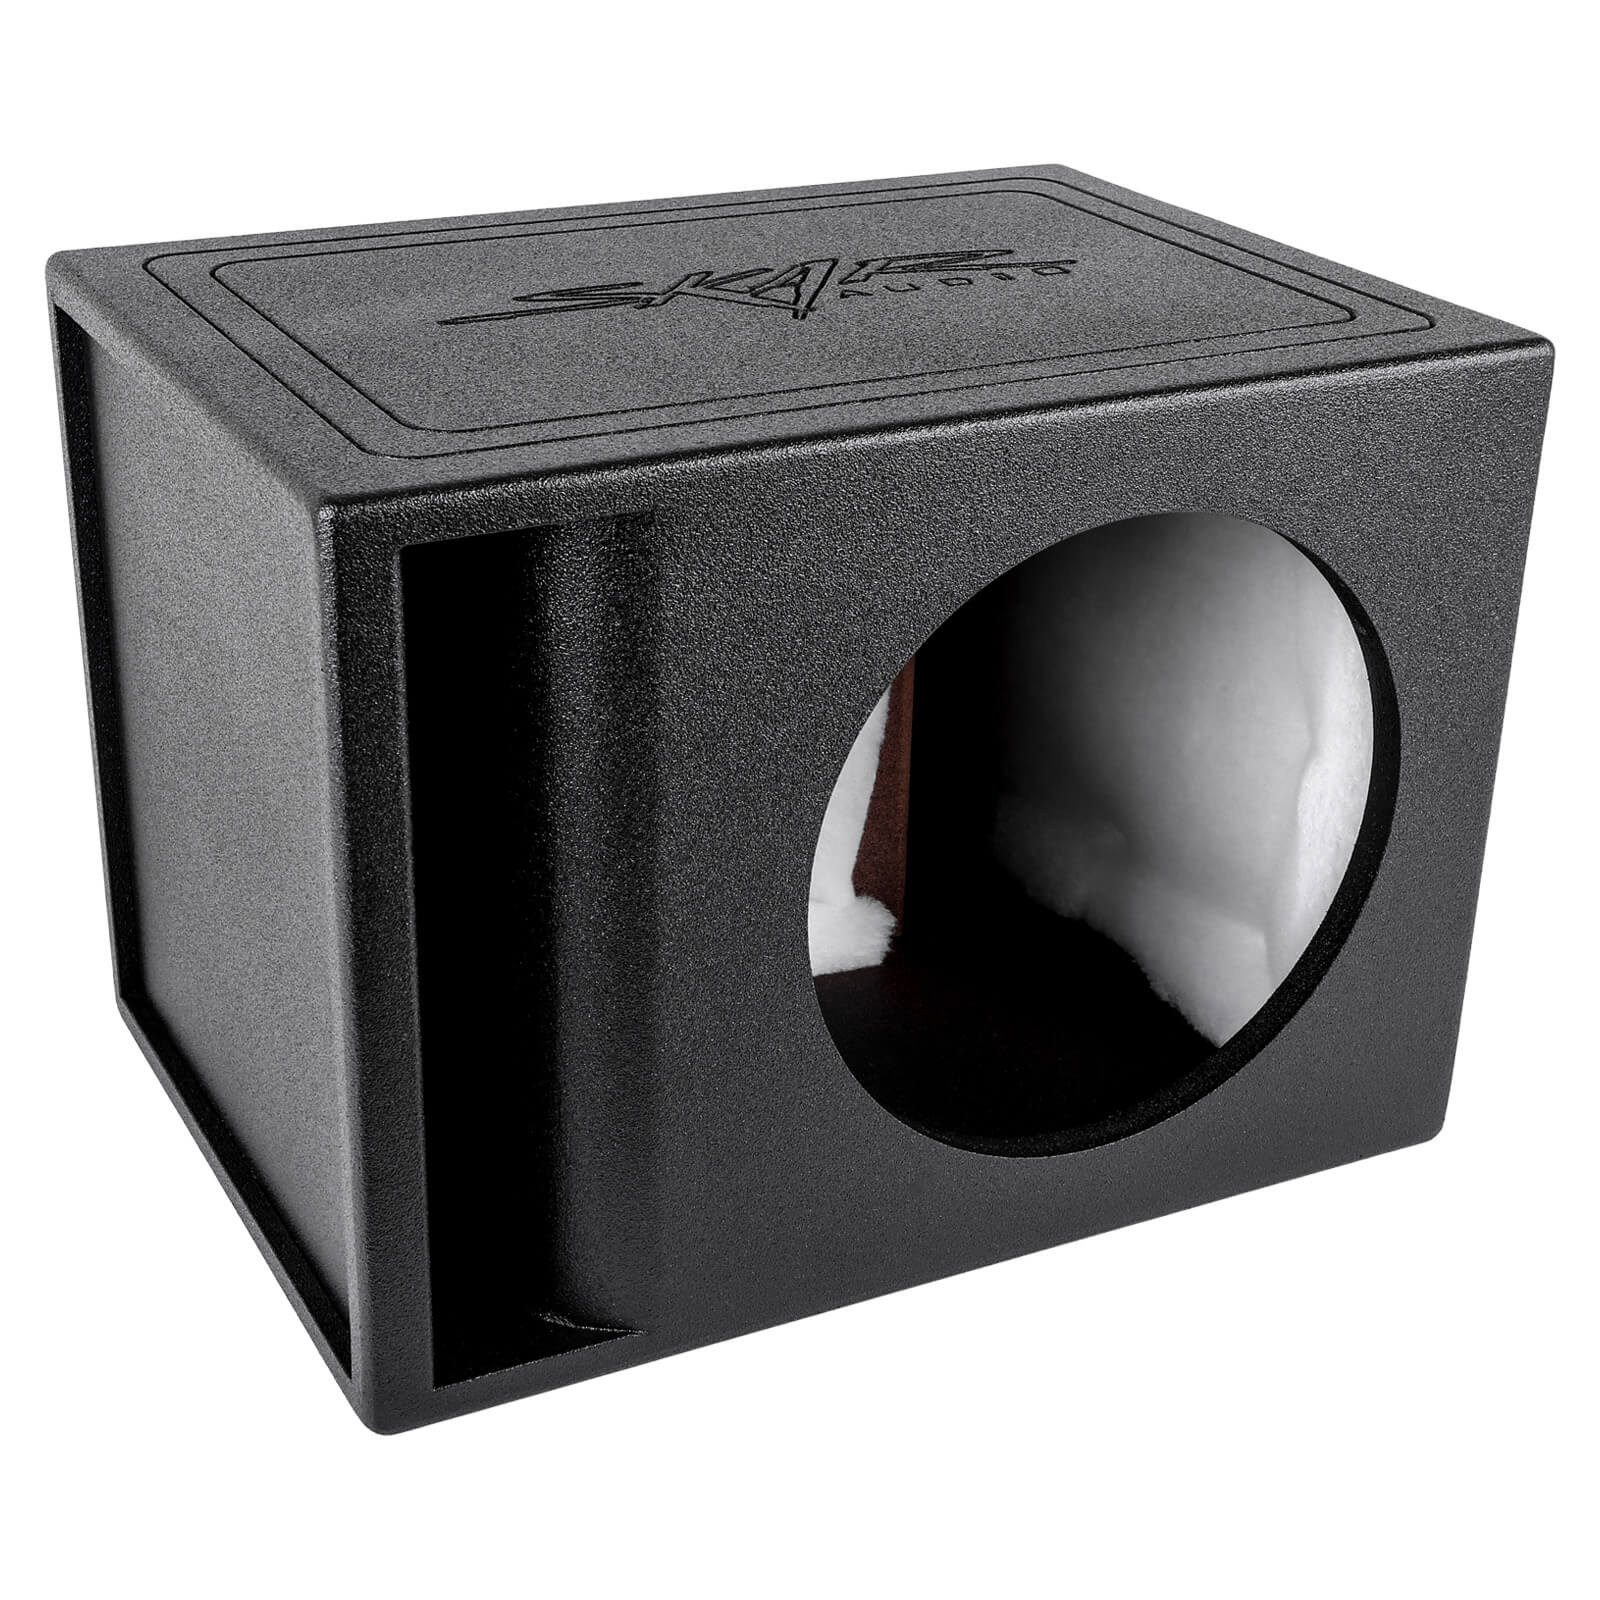 single 12 inch ported subwoofer box